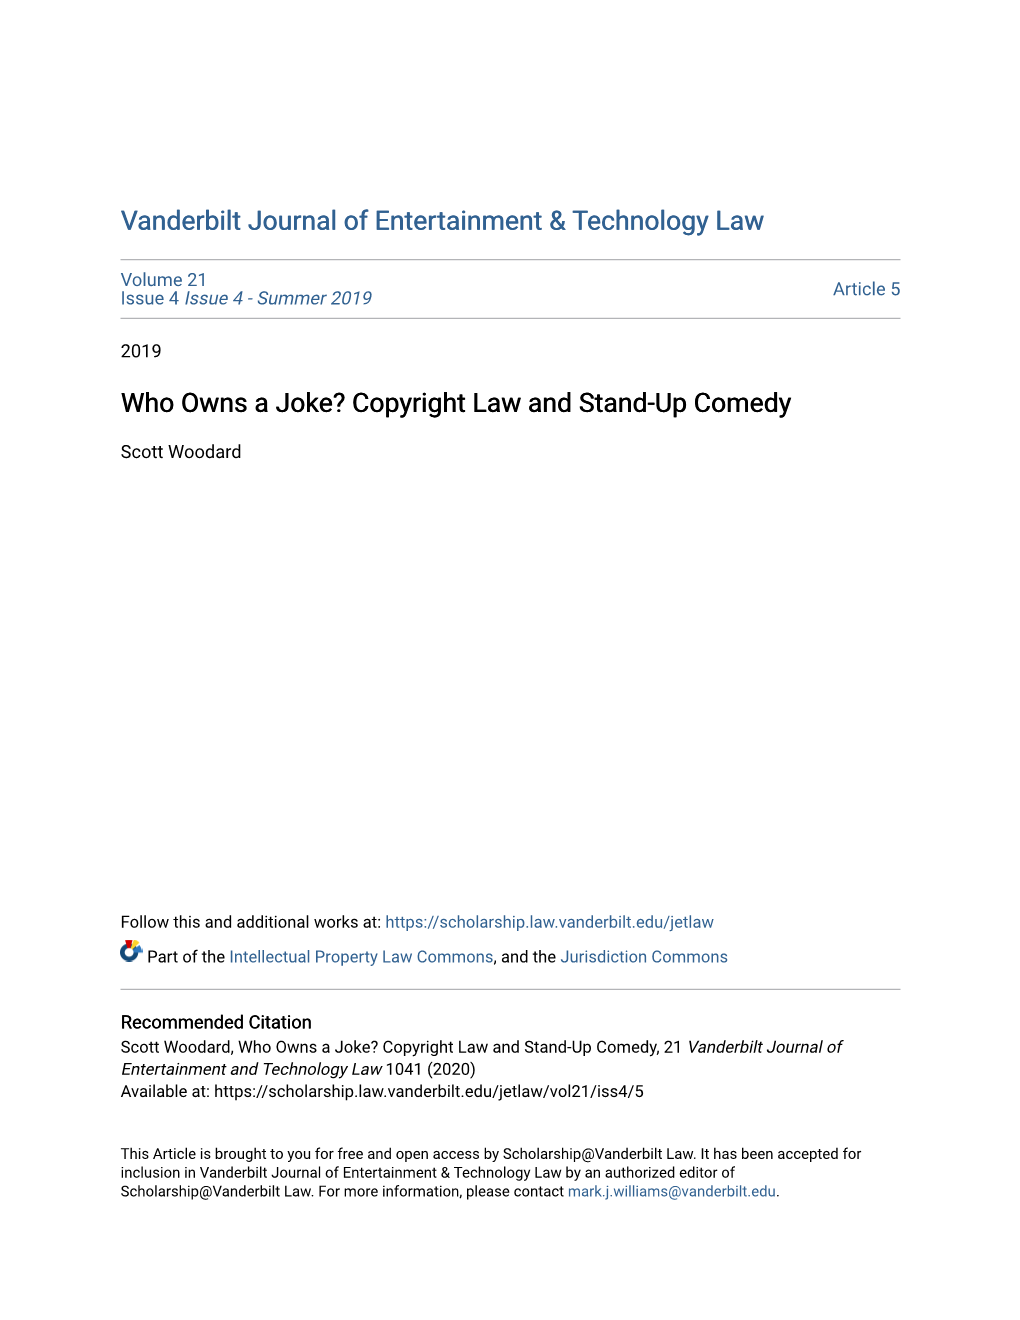 Copyright Law and Stand-Up Comedy